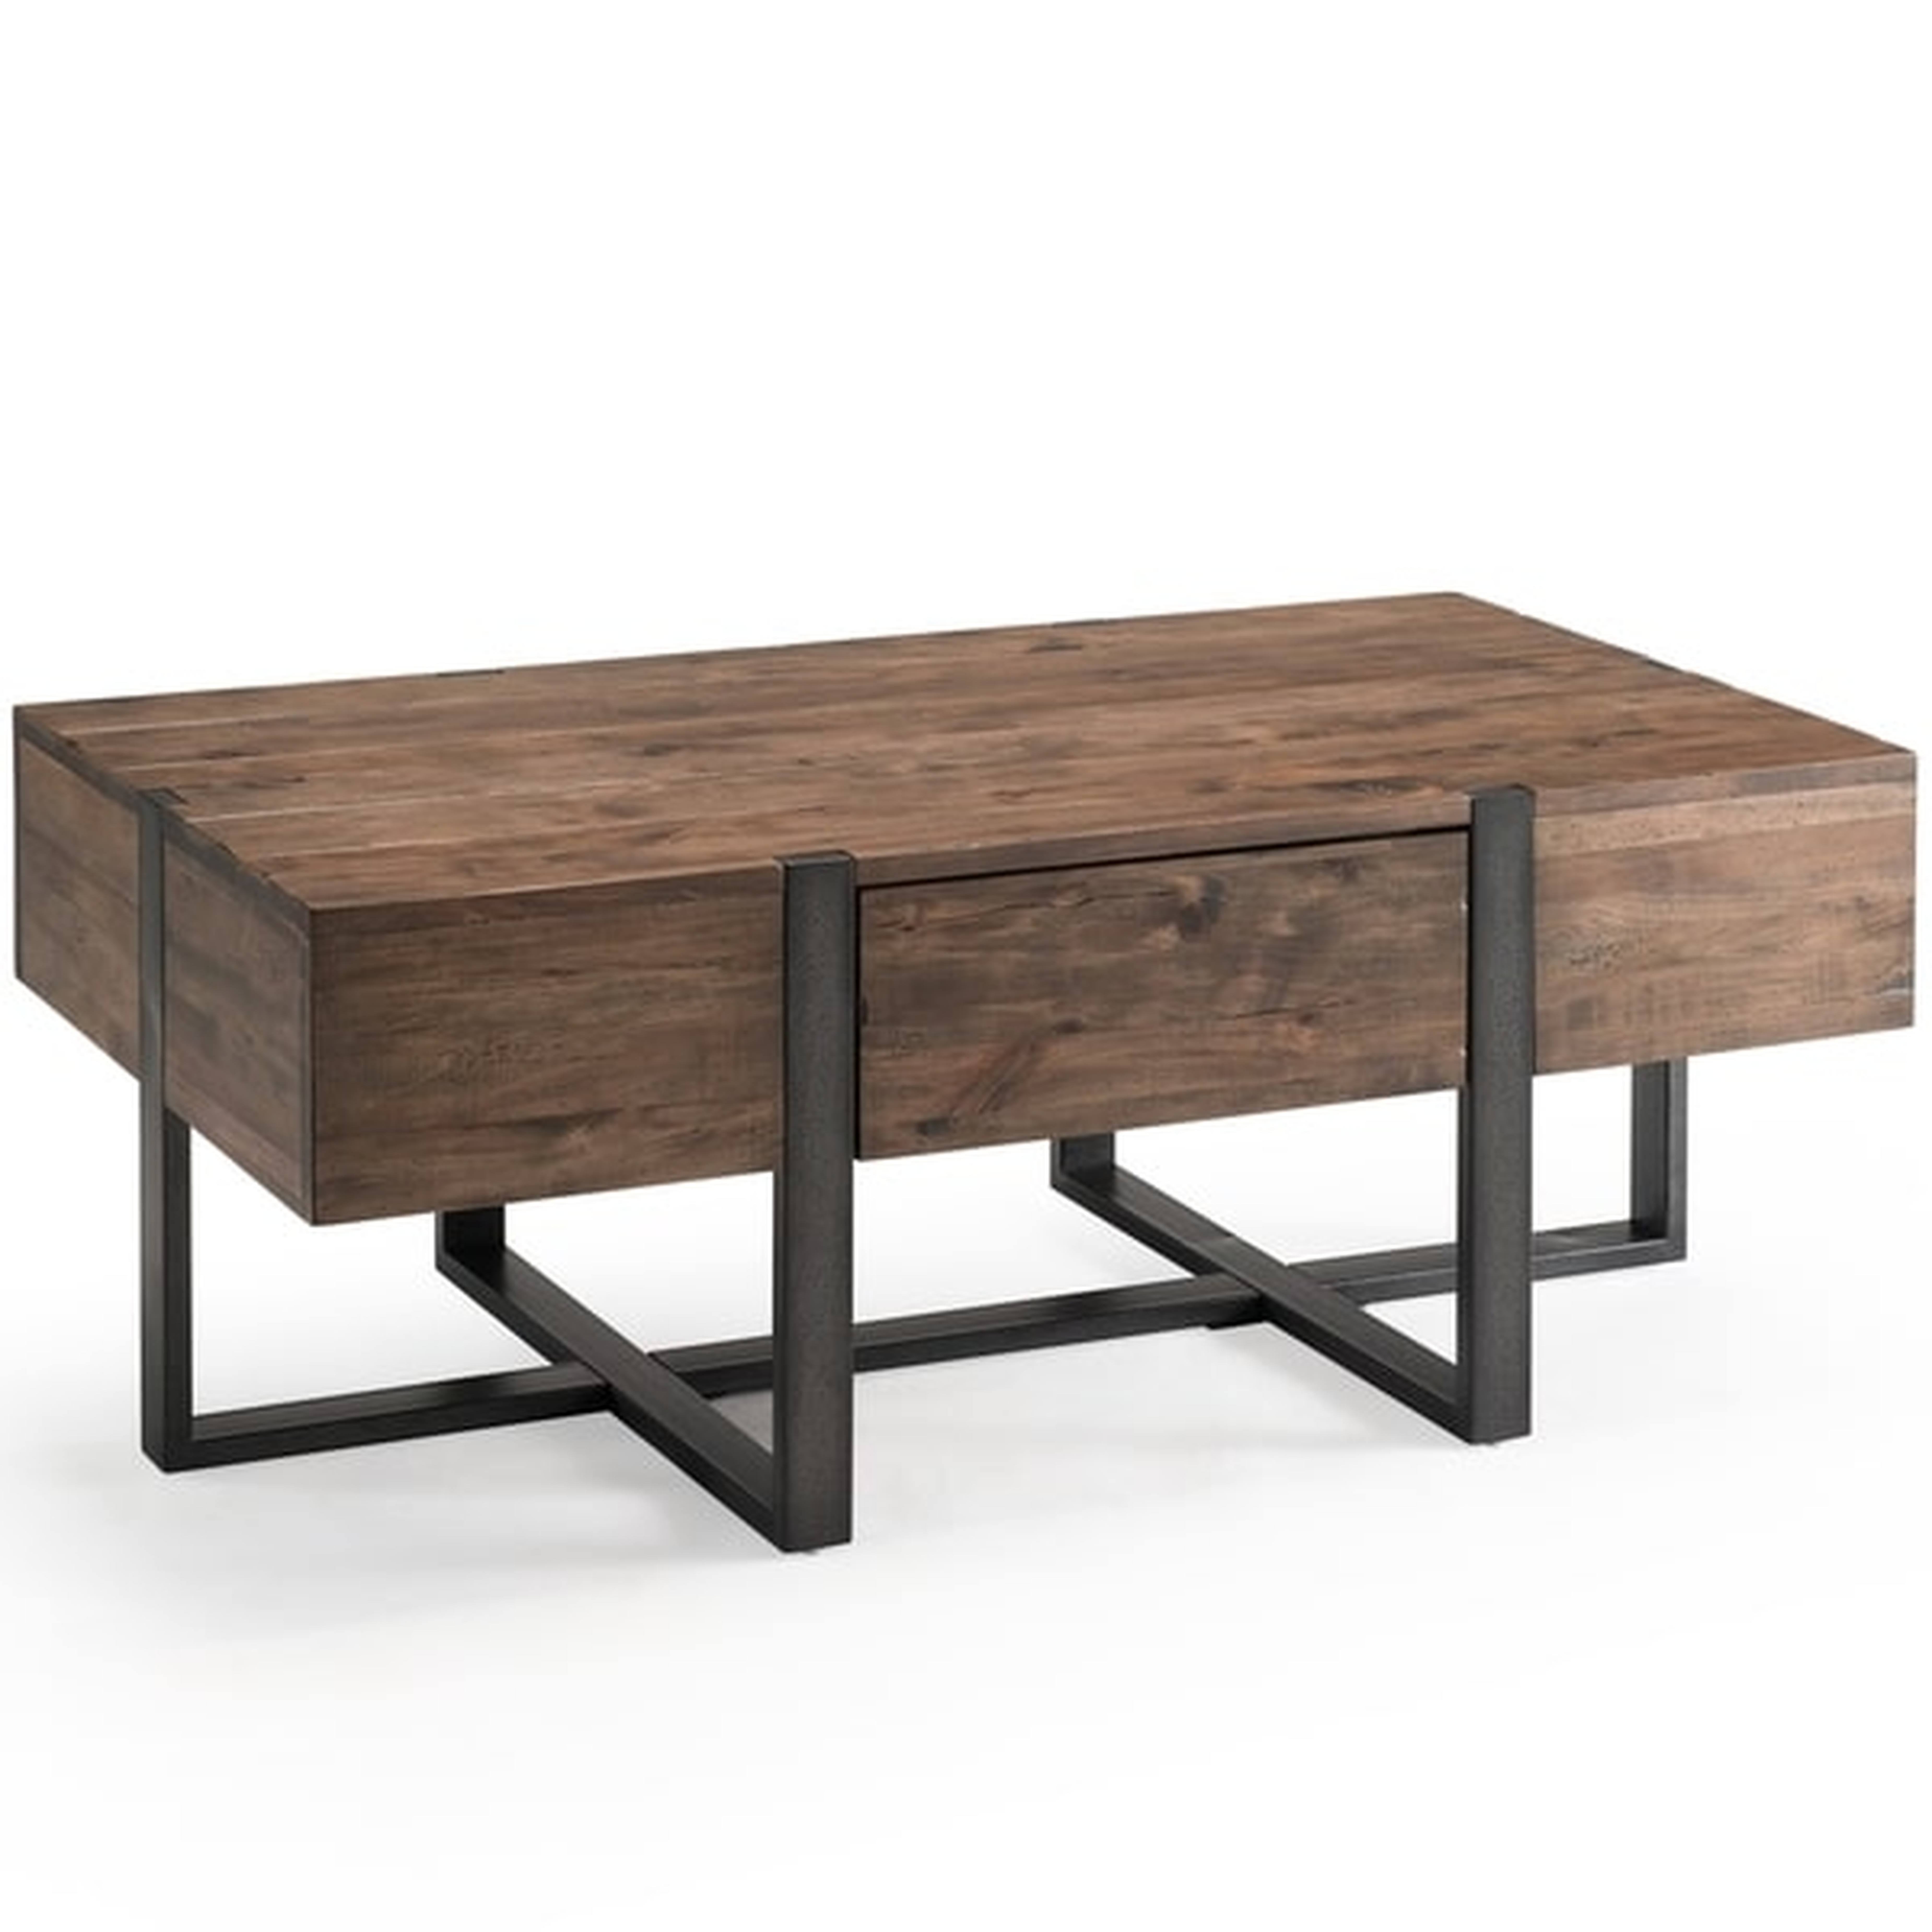 Magnussen Home Furnishings Prescott Rustic Honey Reclaimed Wood Condo Coffee Table with Metal Base - Overstock